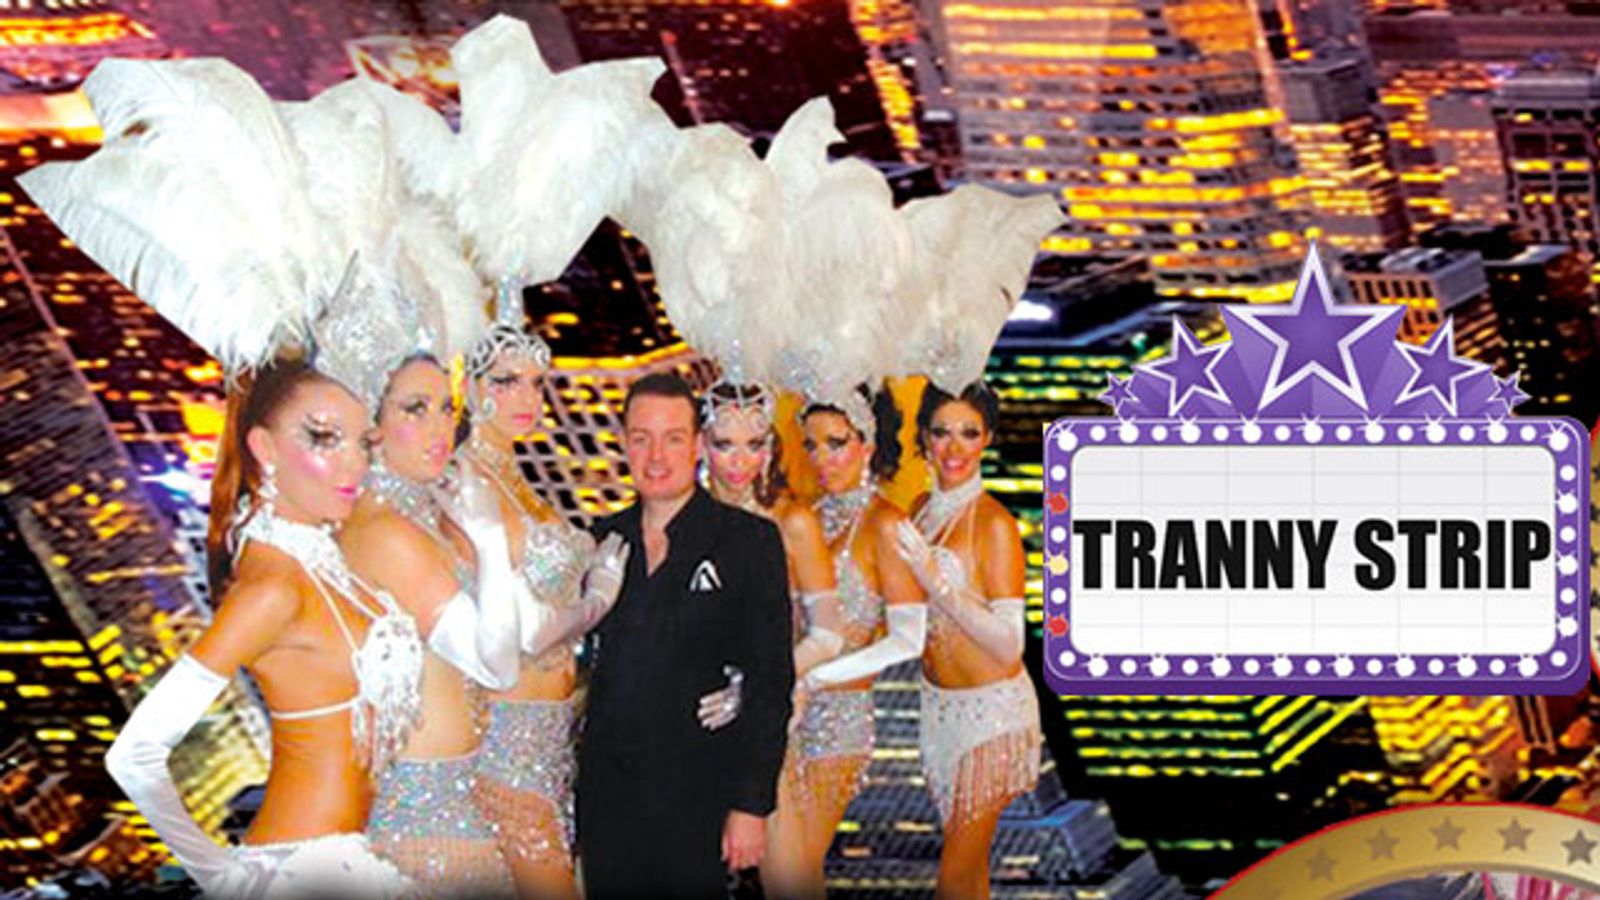 Tranny Strip Celebrates Second Anniversary with Larger than Life Party